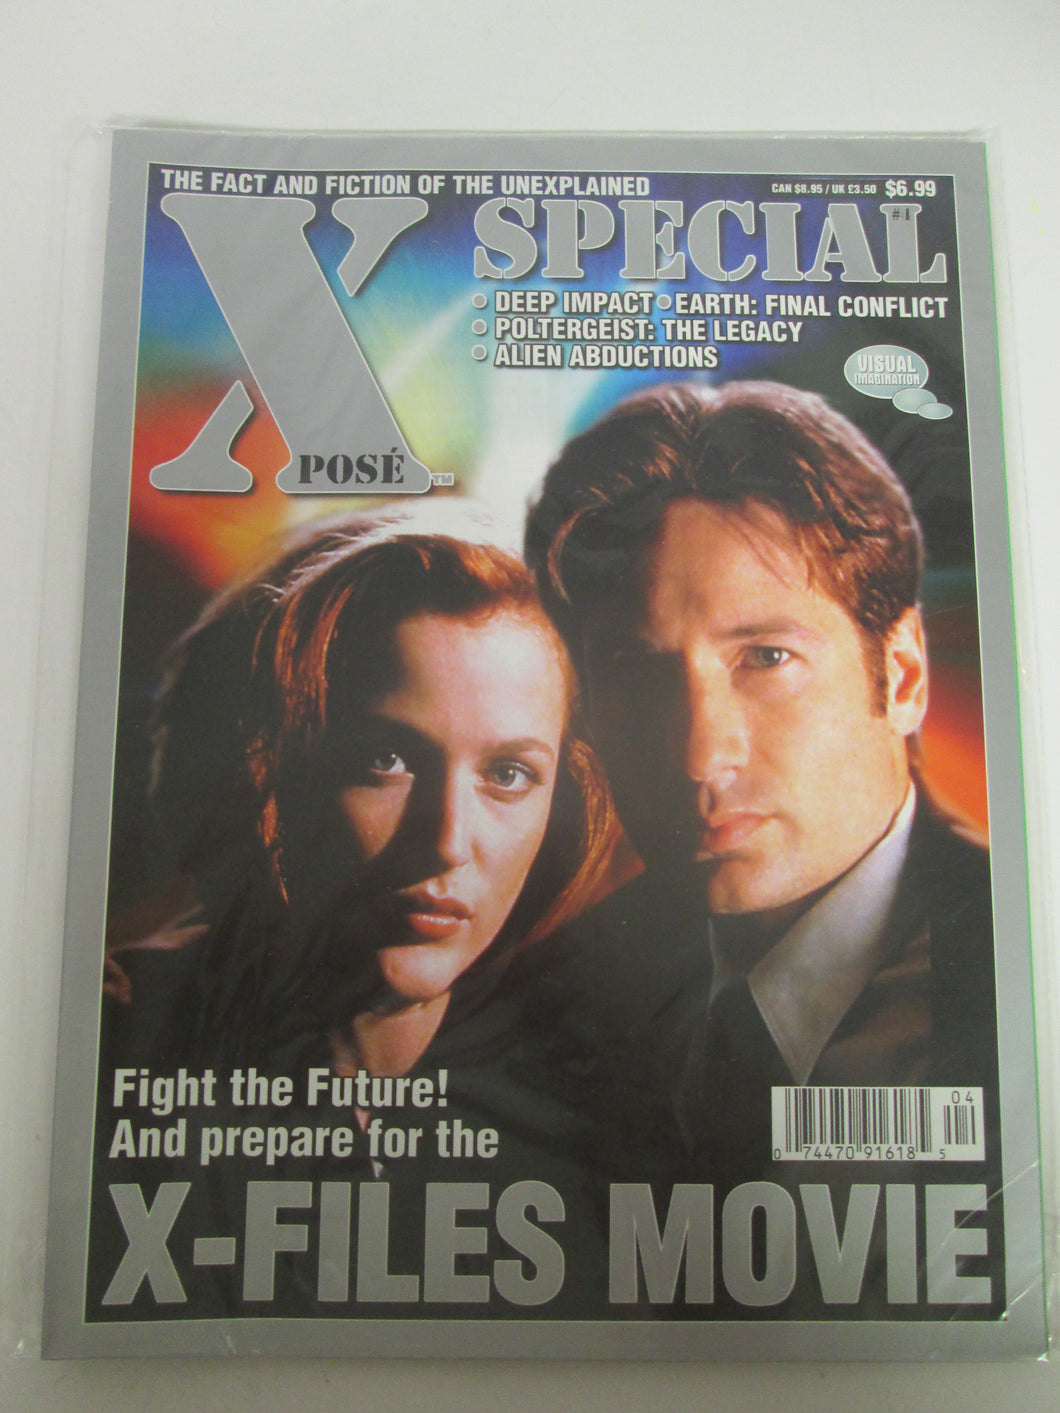 Xpose' X-Files Movie Fact & Fiction of the Unexplained #4